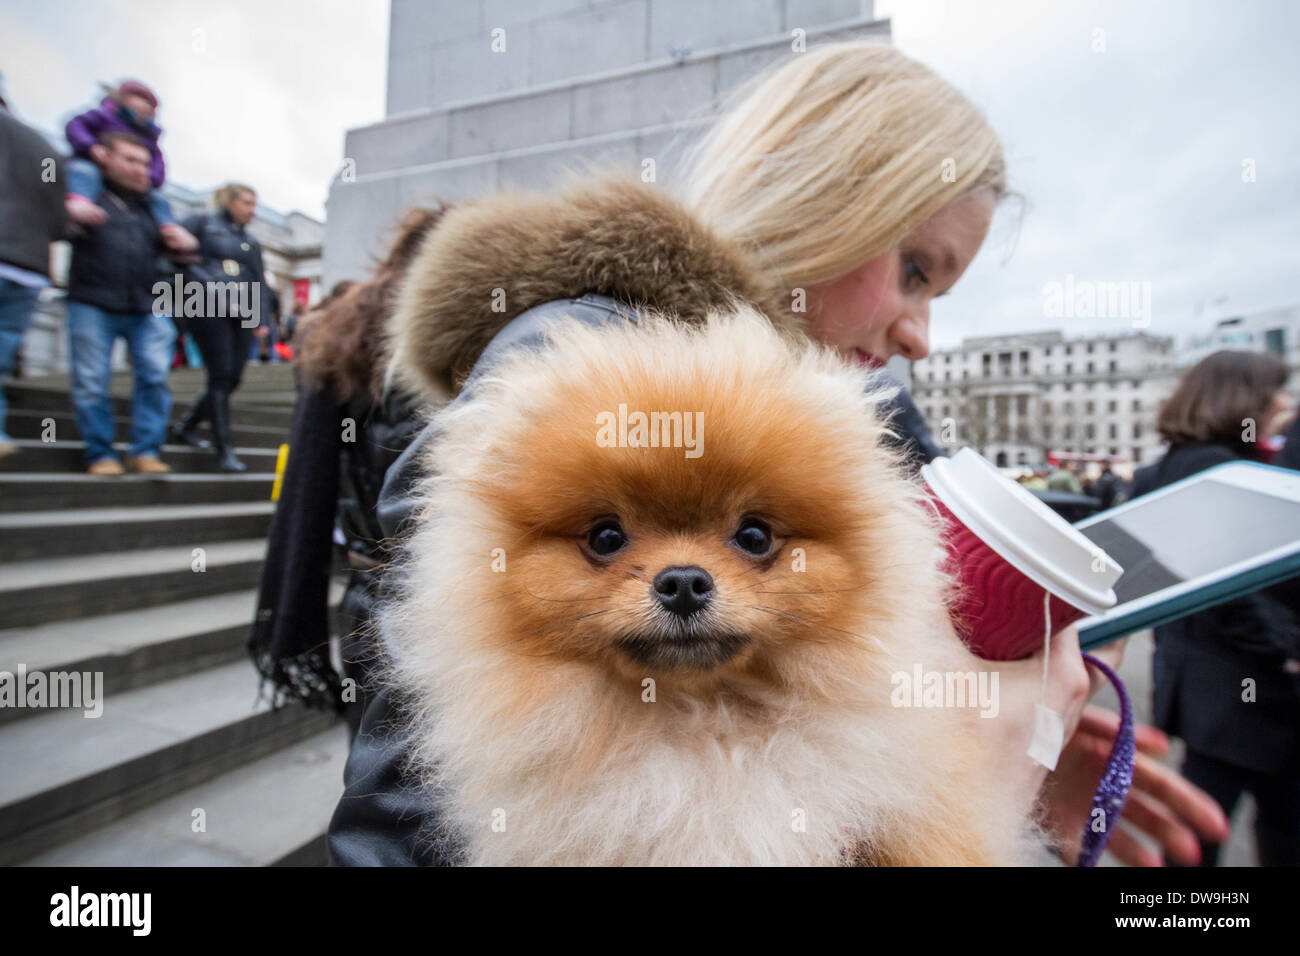 Russian spectator with pet dog. Crowds gather for Russian Maslenitsa Festival 2014 in London Stock Photo